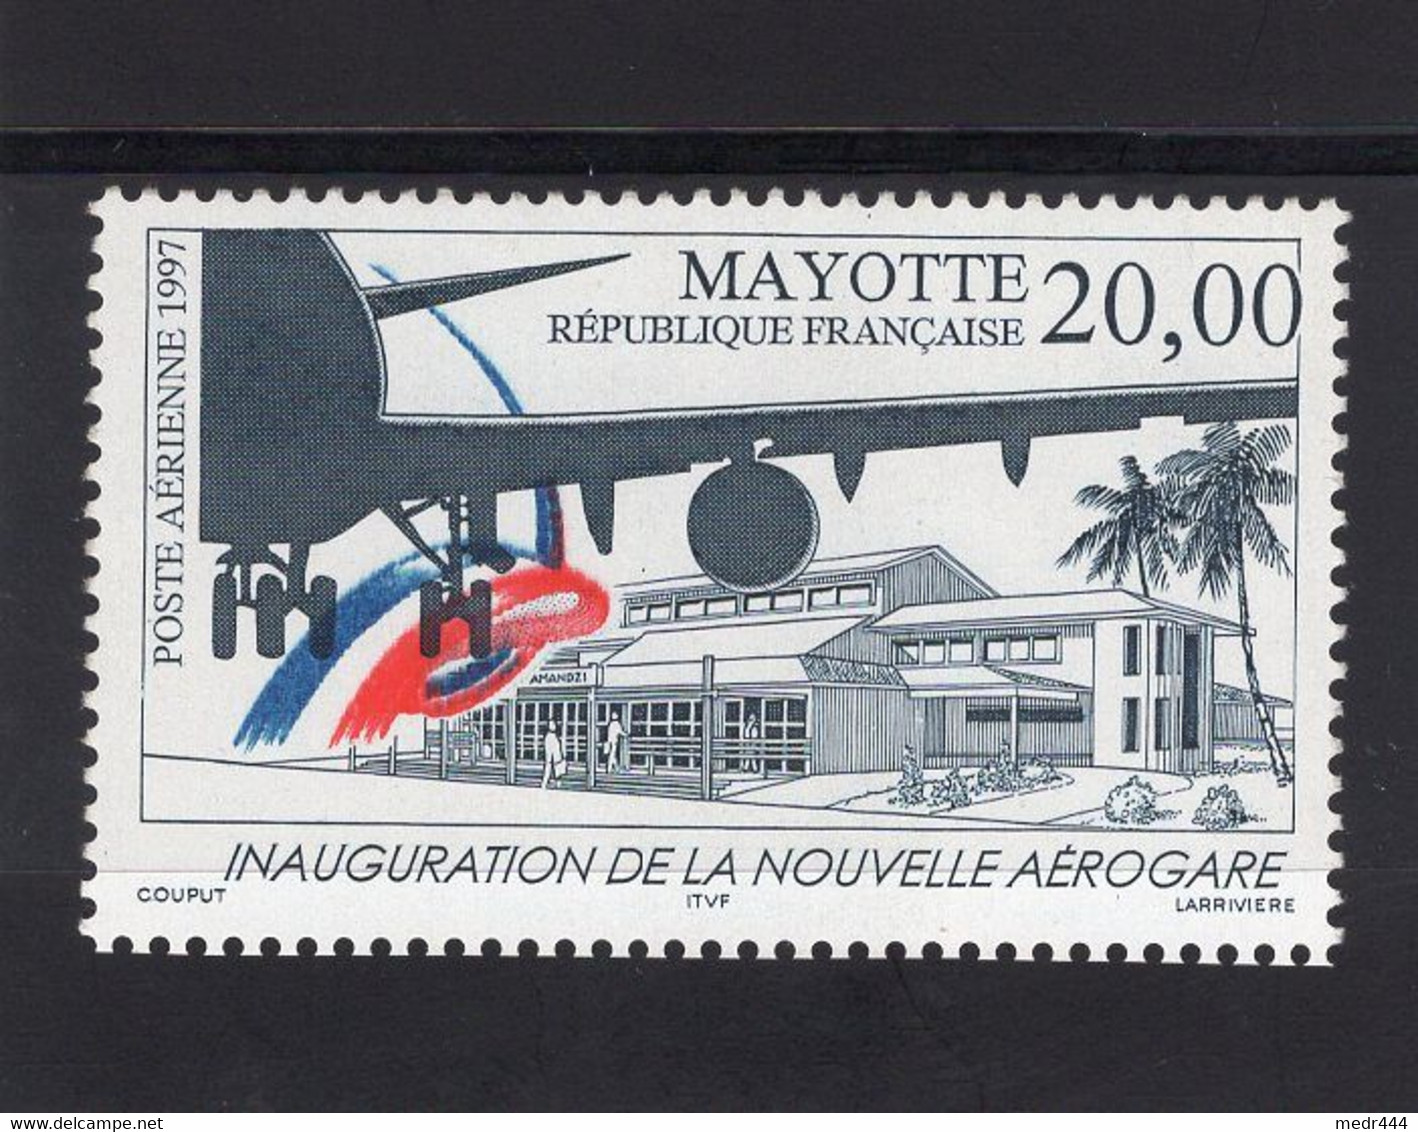 Mayotte 1997 - Airmail - Inauguration Of The New Airport - Stamp - Complete Set - MNH** Excellent Quality - Posta Aerea